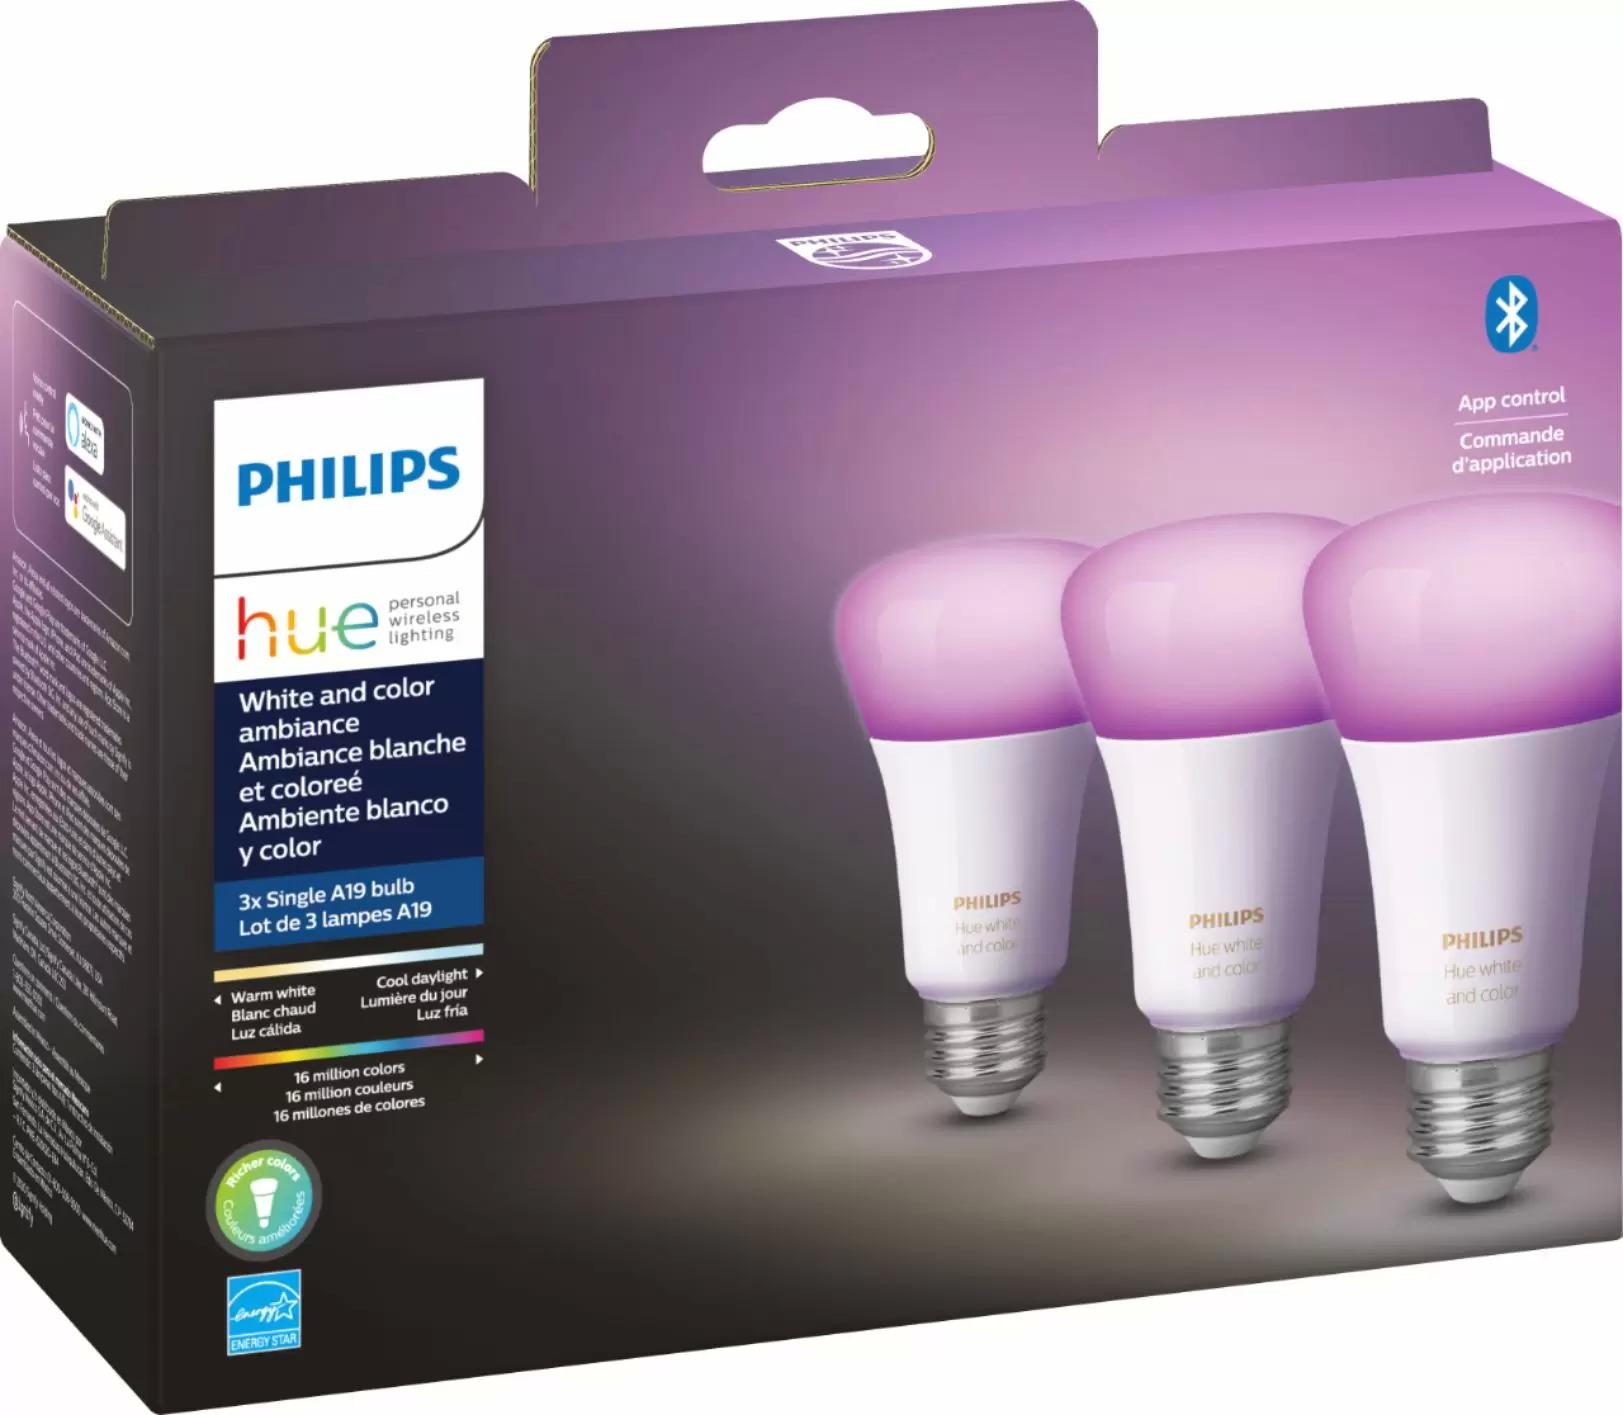 3 Philips Hue White and Color Ambiance A19 LED Smart Bulbs for $79.98 Shipped